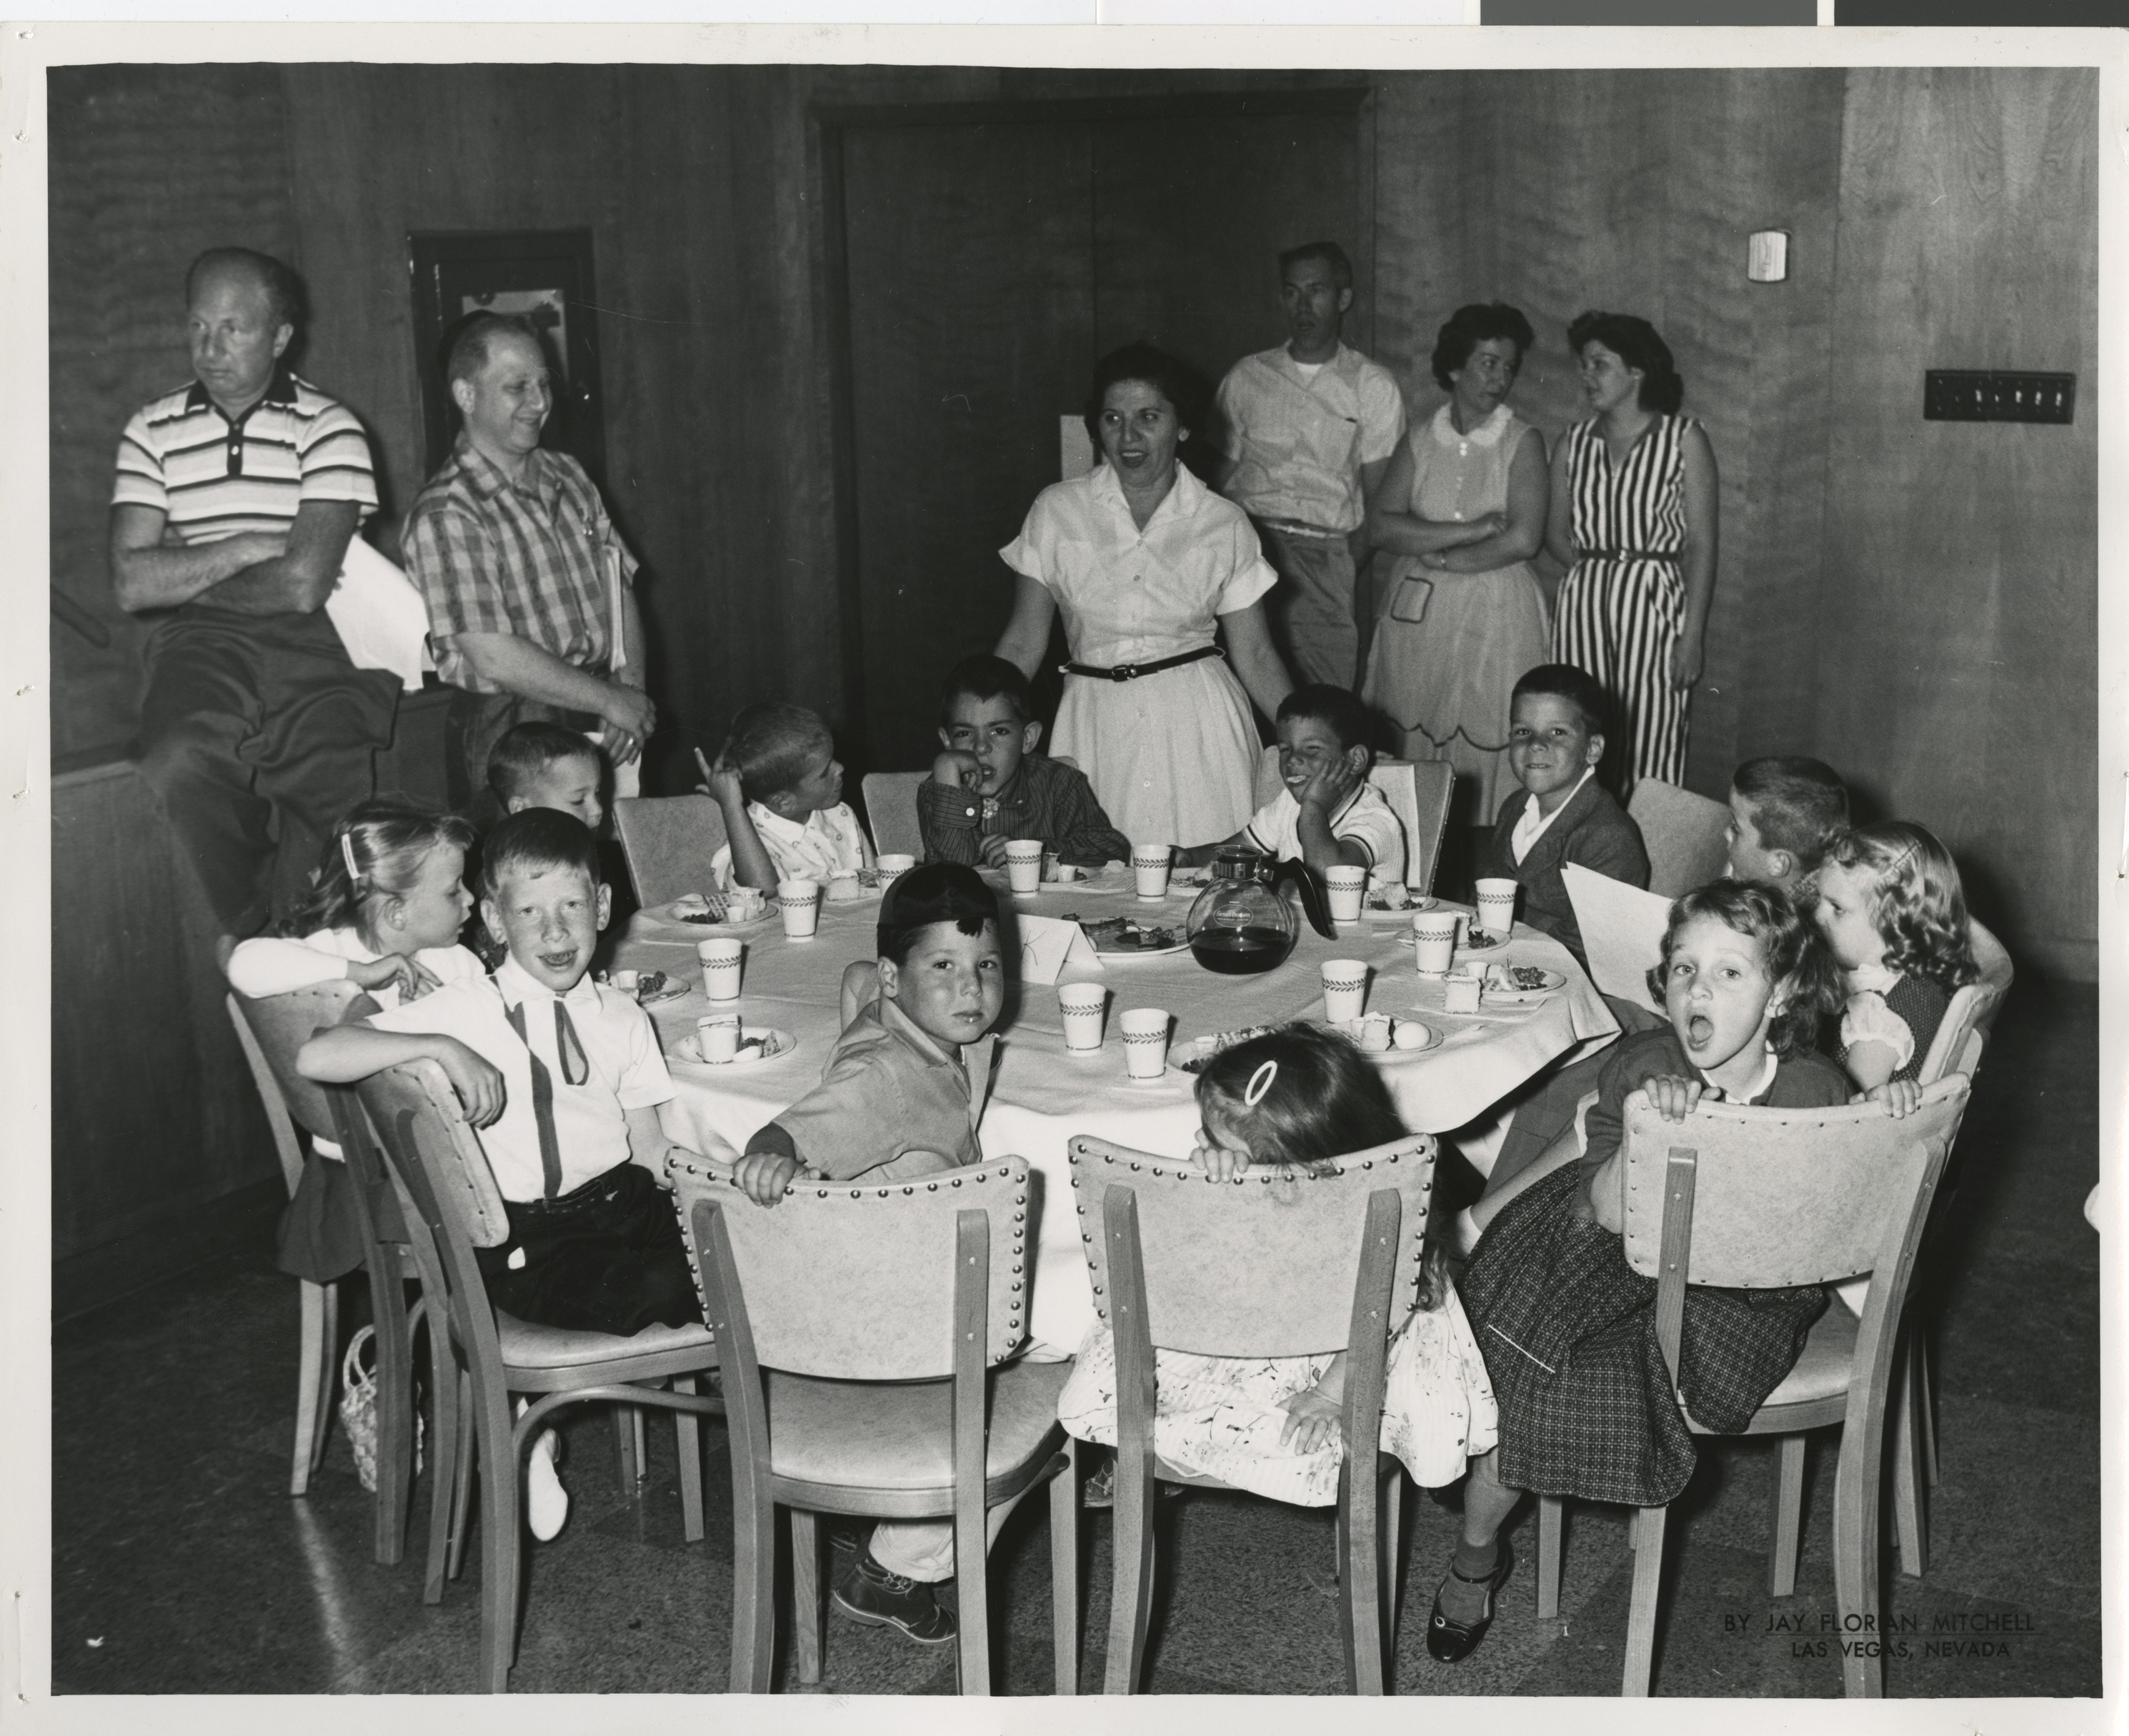 Photograph of a group of children at a round table, 1960s